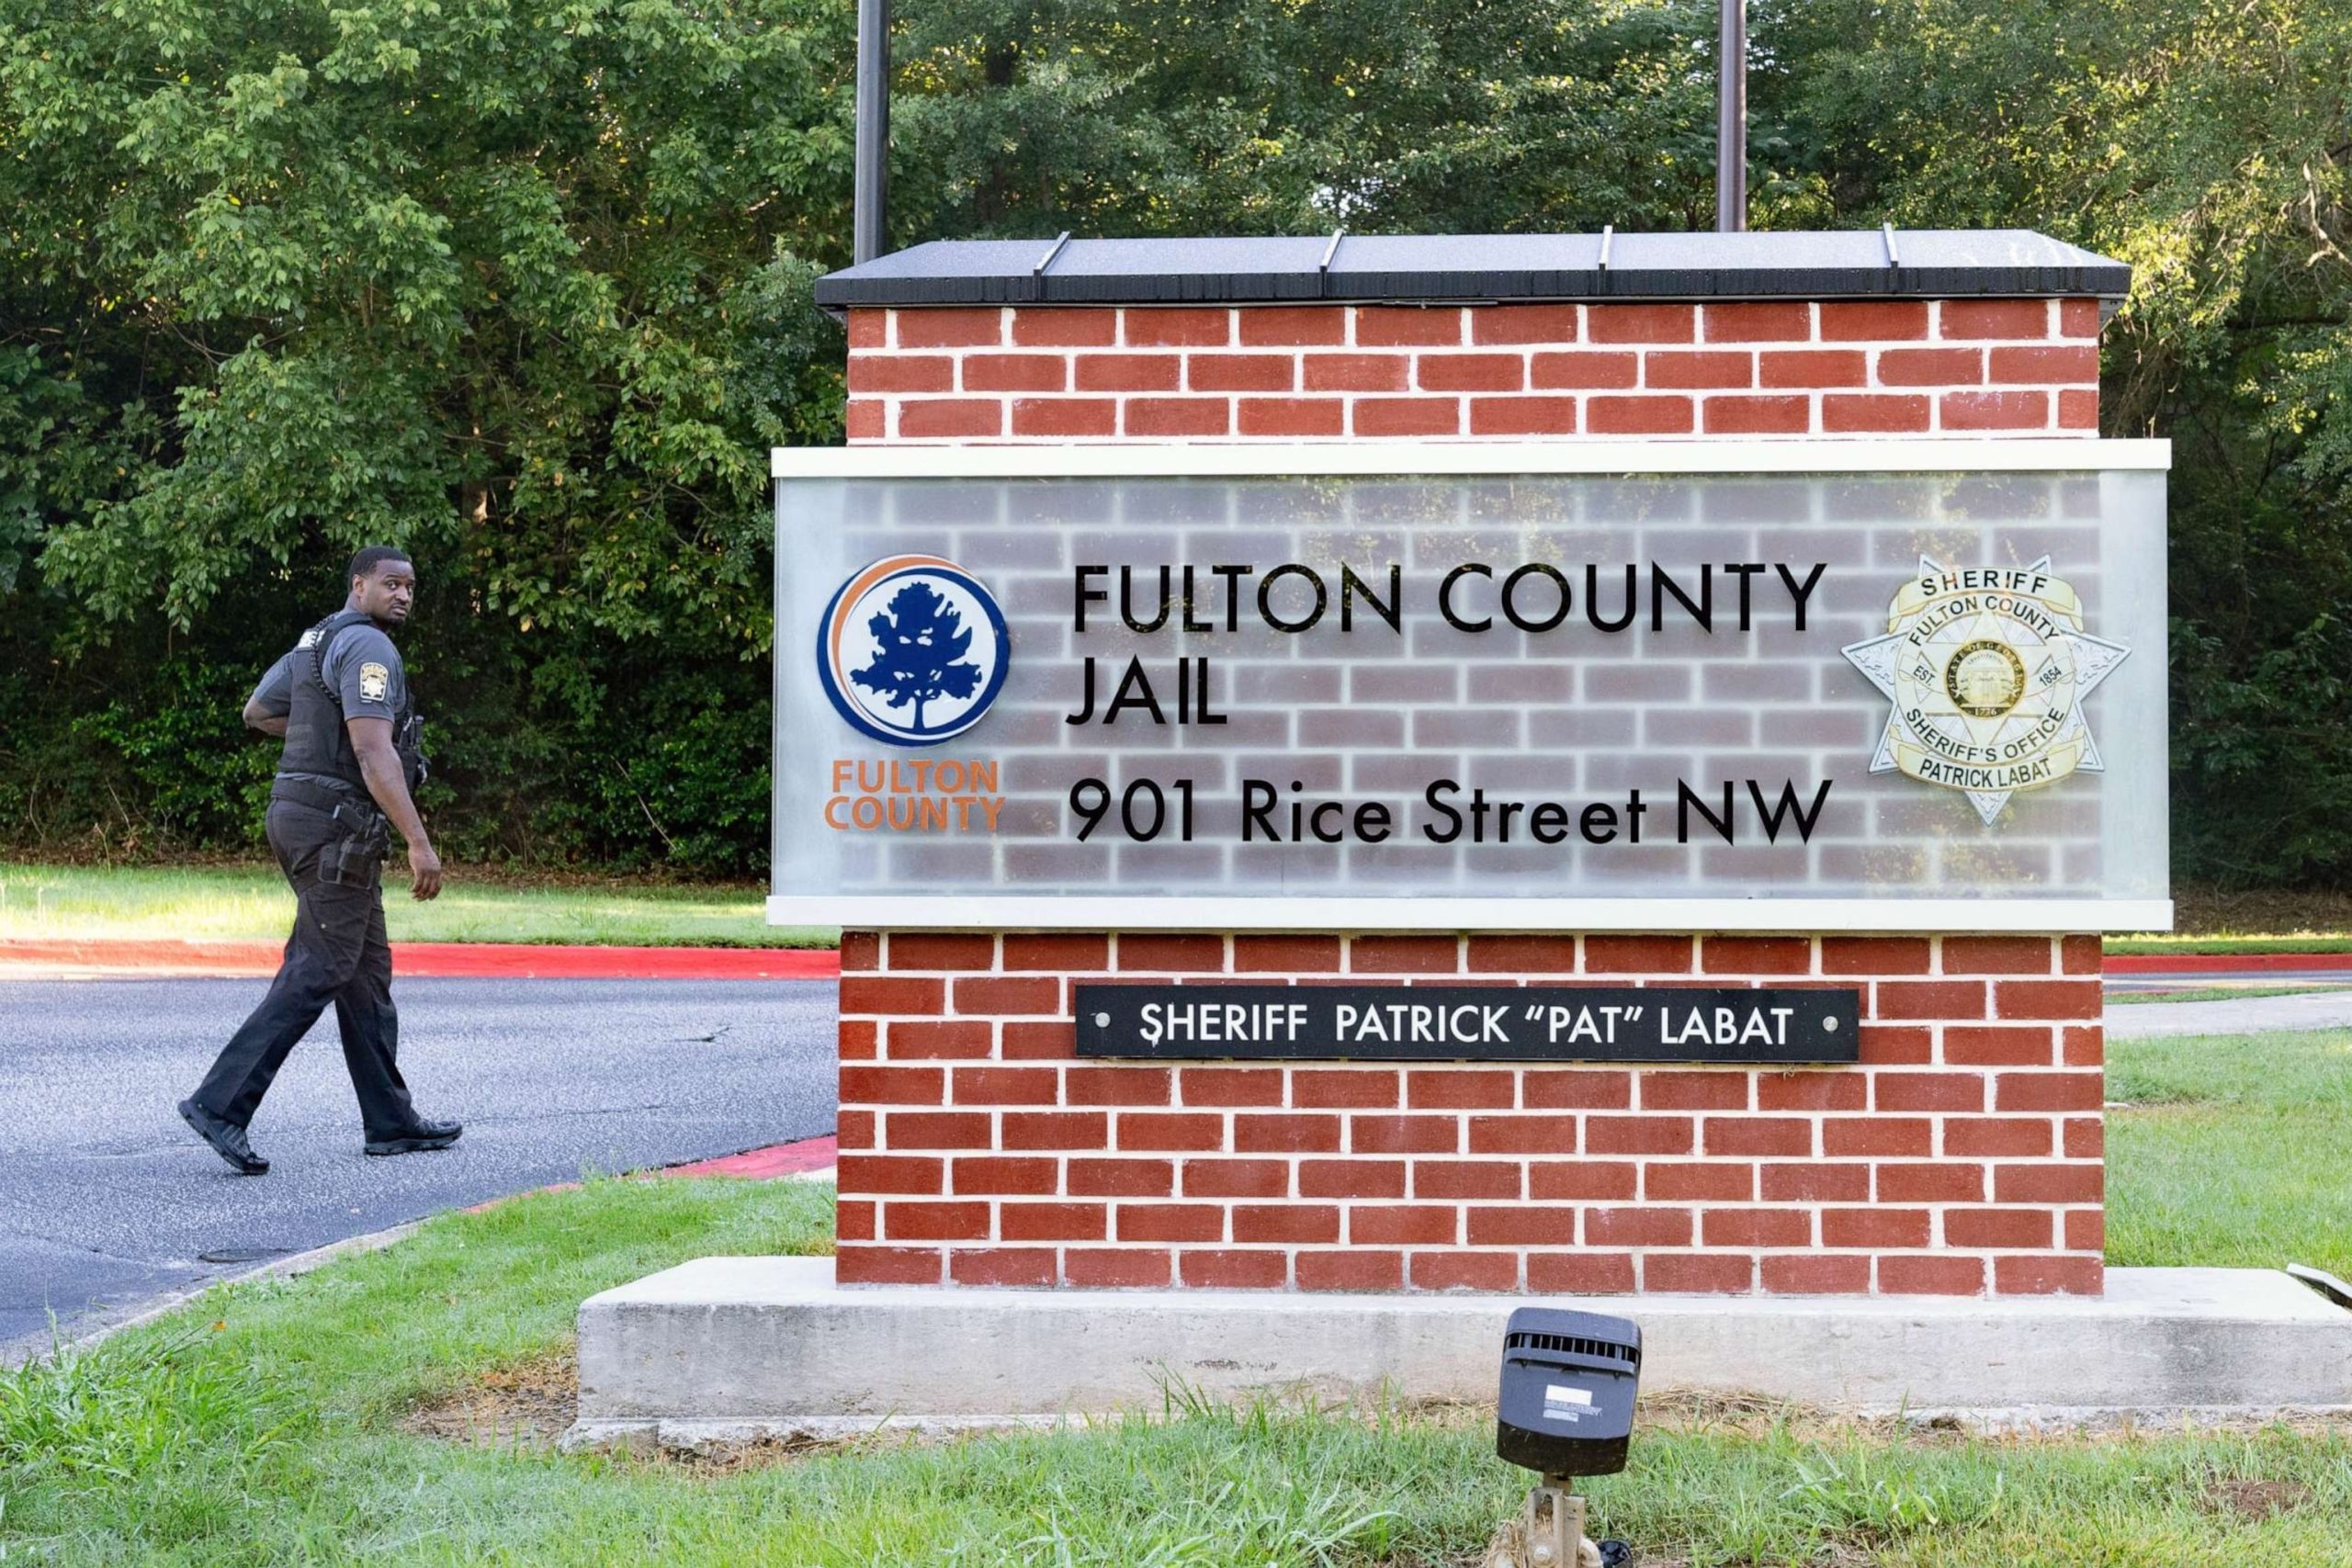 Tenth Inmate Death This Year Reported at Fulton County Jail